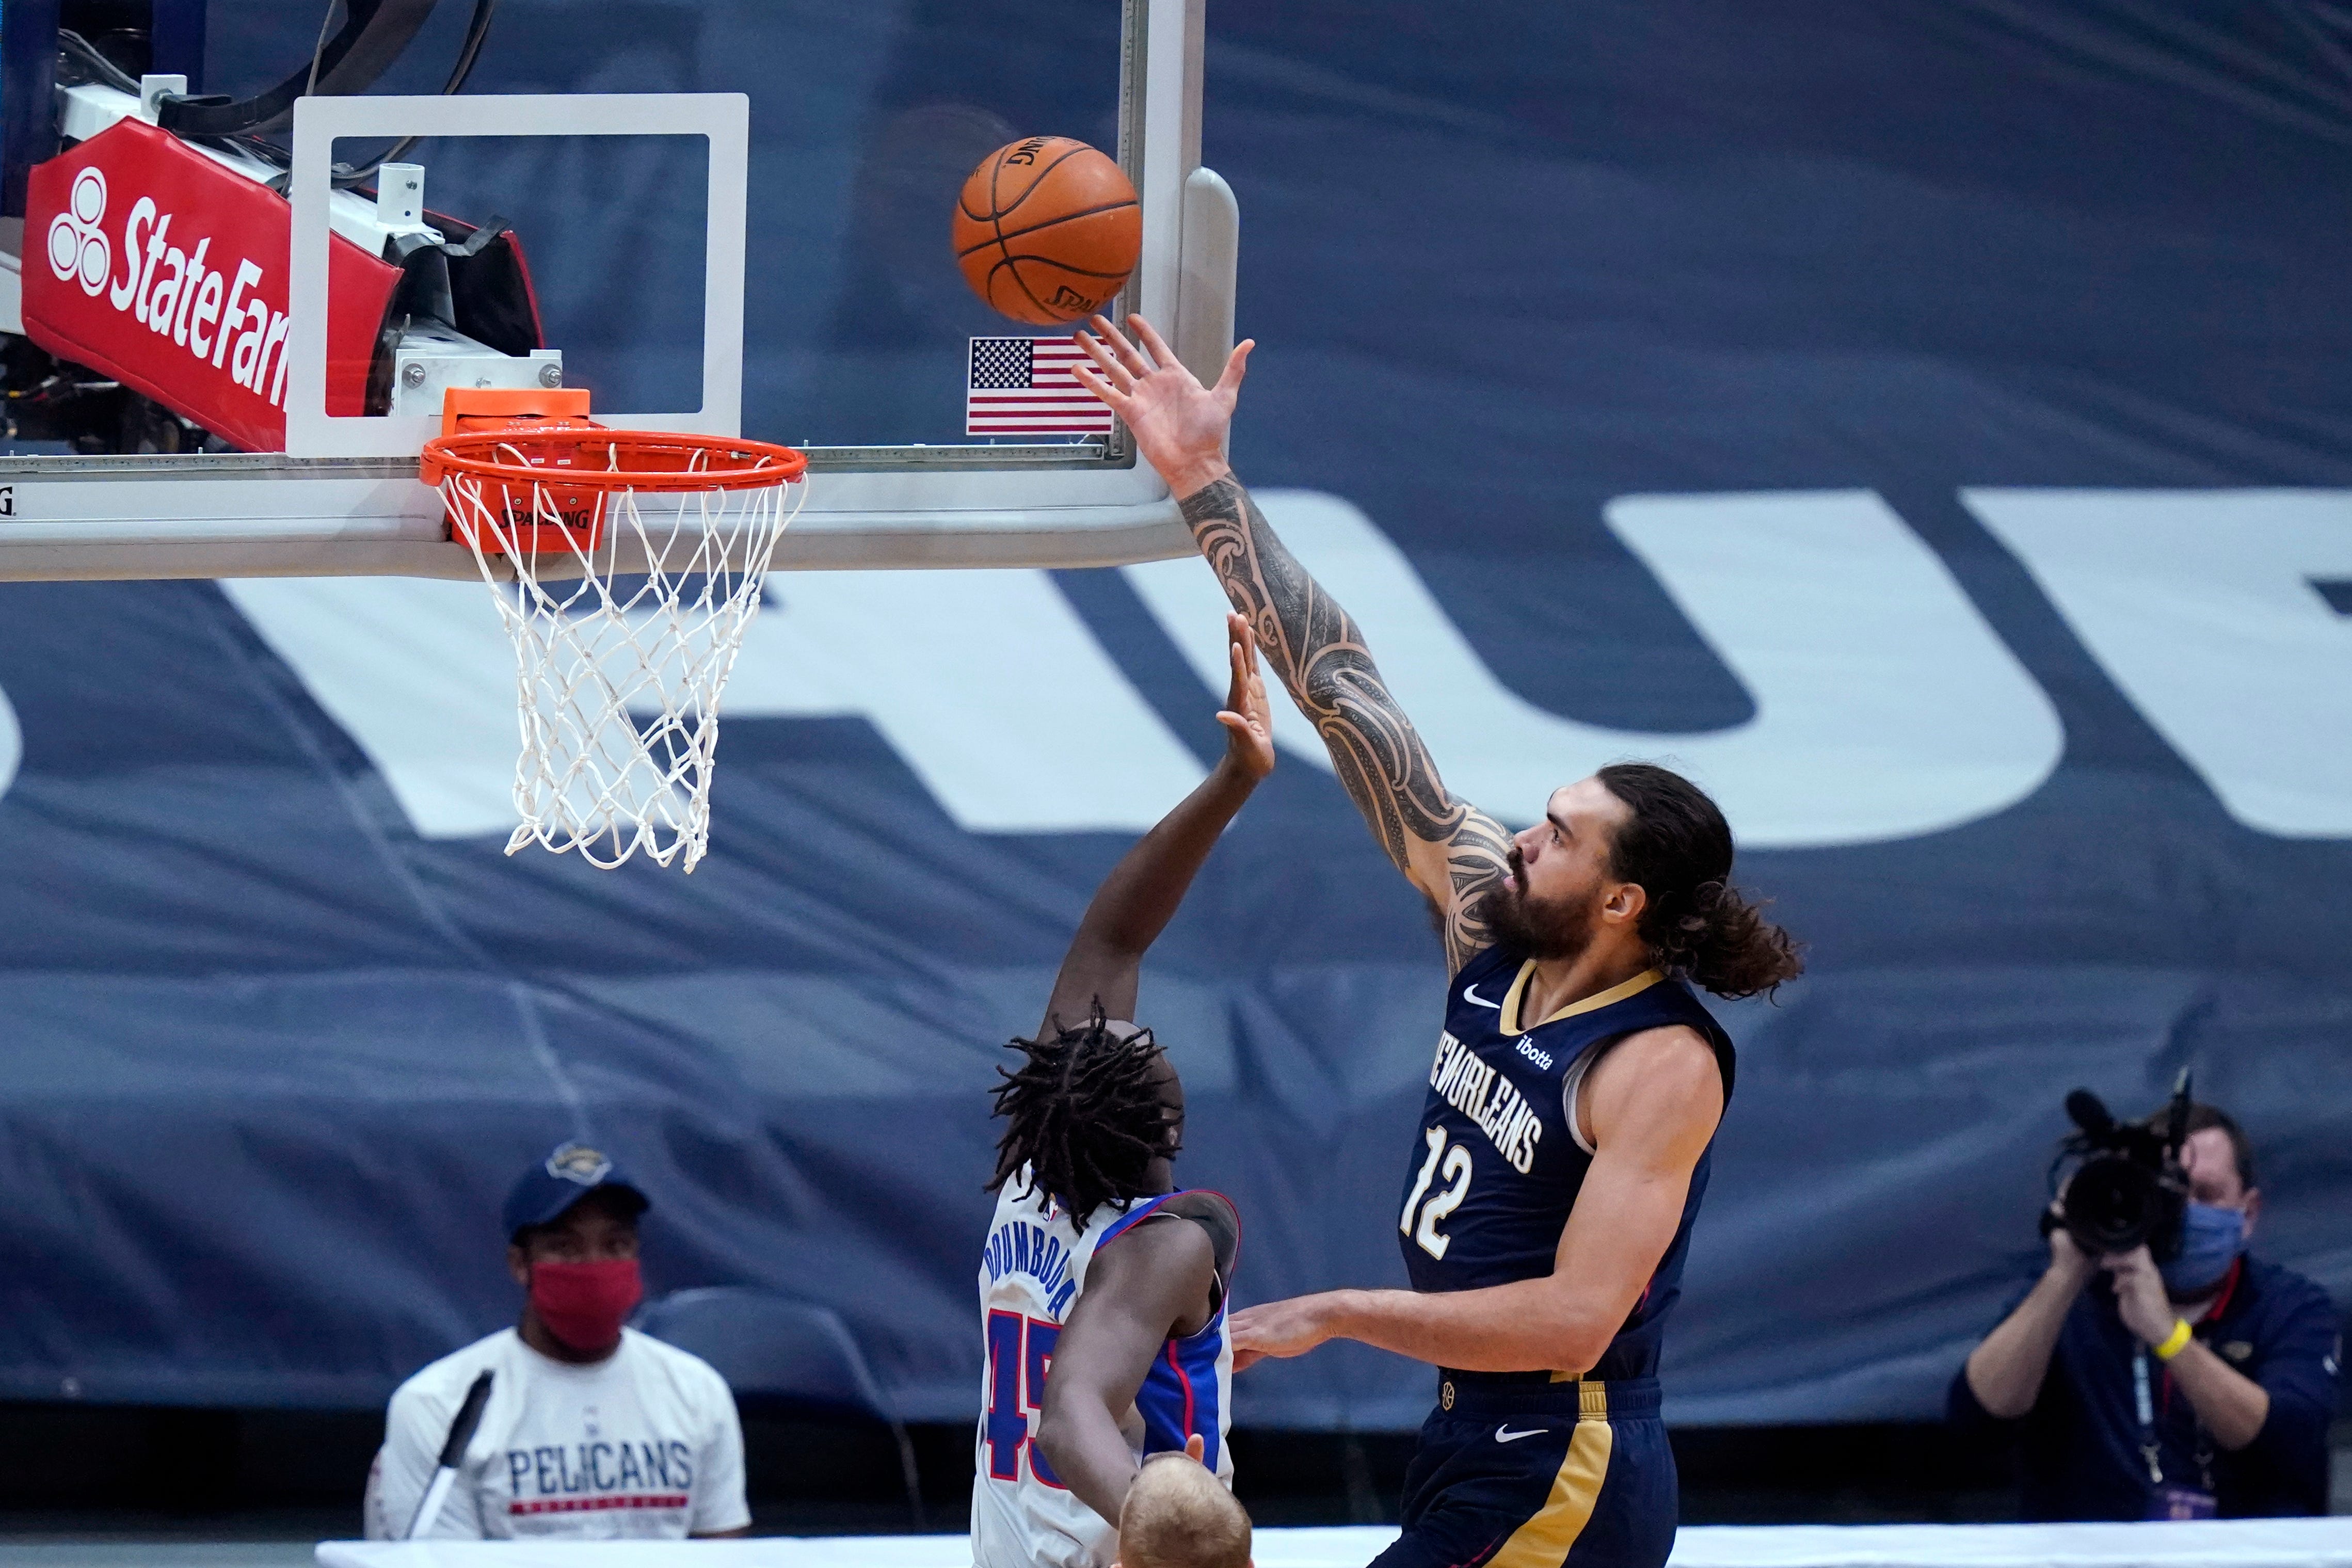 New Orleans Pelicans center Steven Adams (12) goes to the basket against Detroit Pistons forward Sekou Doumbouya (45) during the first half of an NBA basketball game in New Orleans, Wednesday, Feb. 24, 2021.